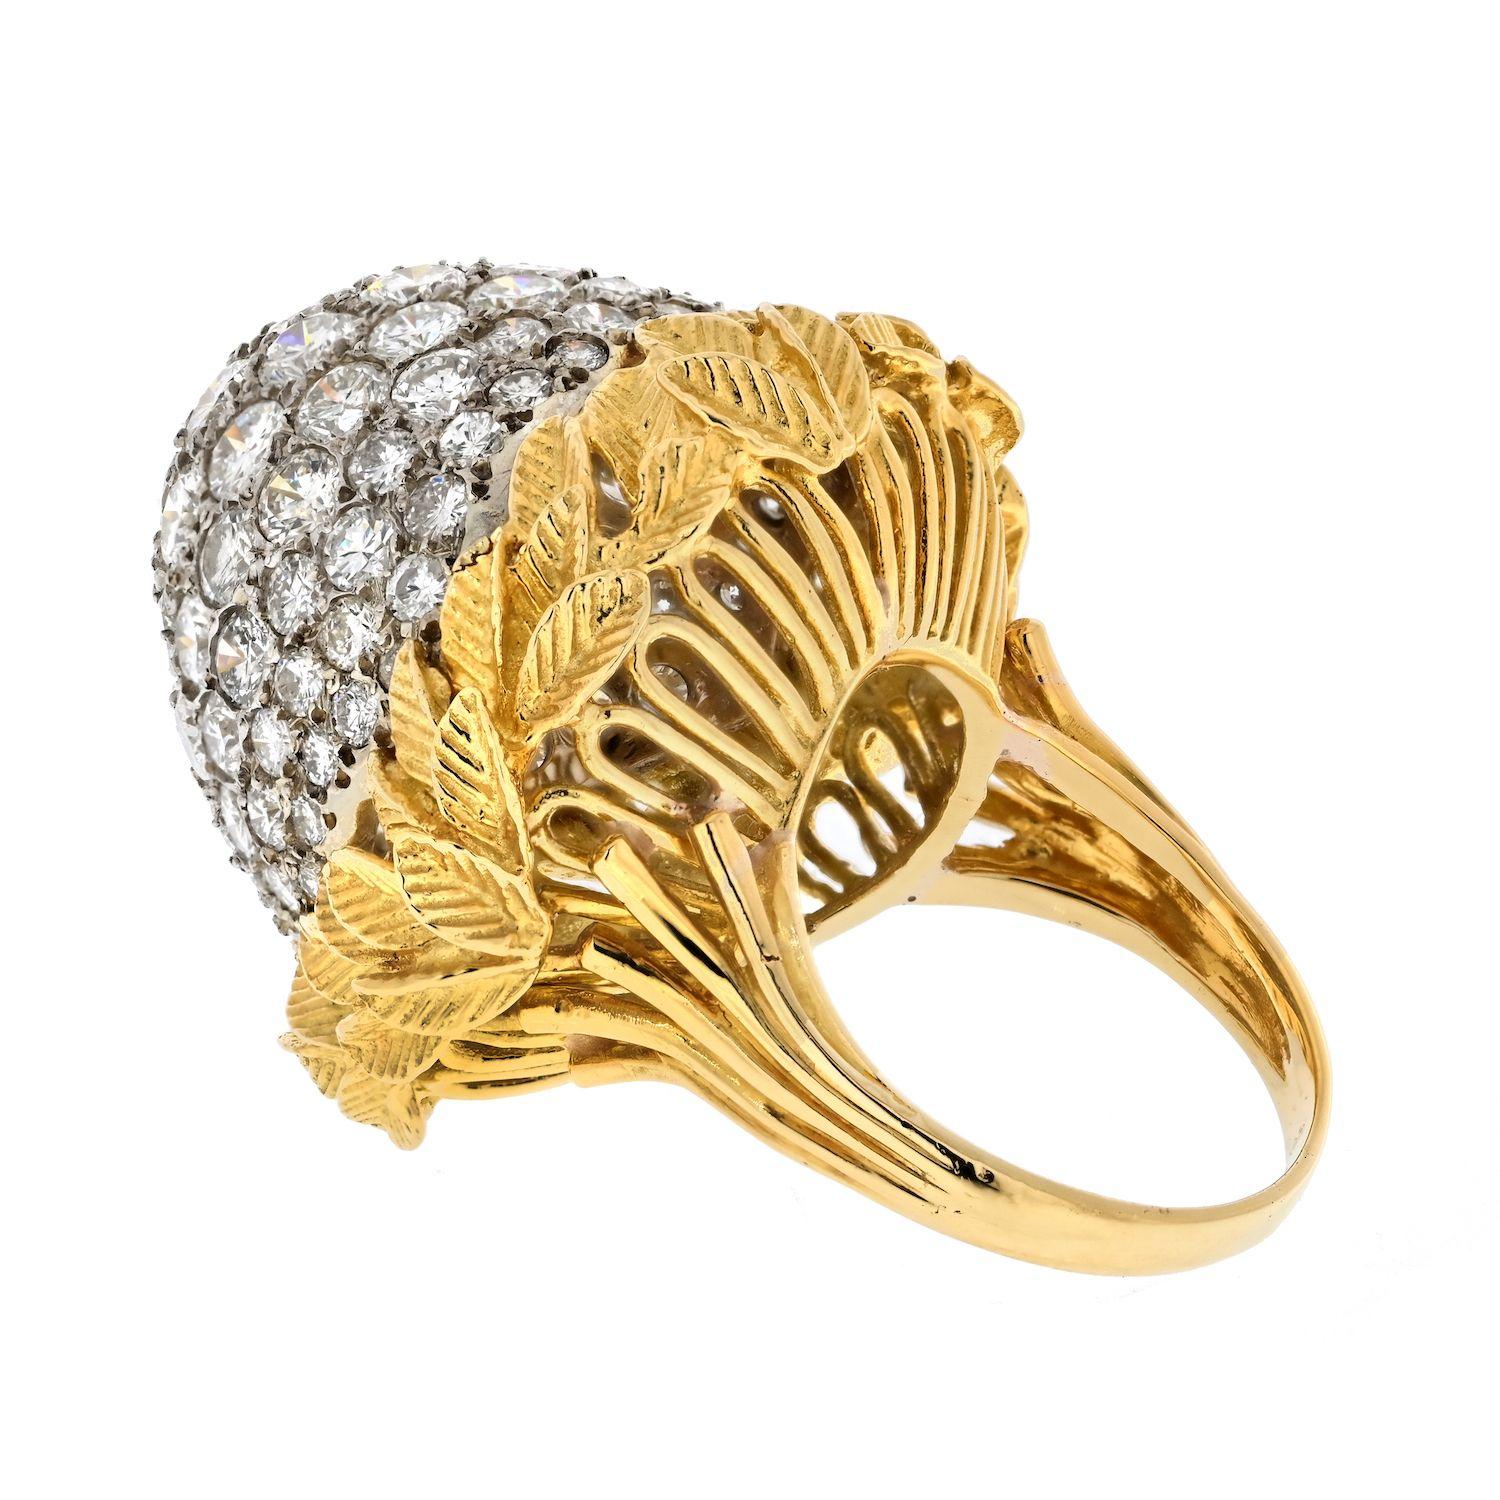 Indulge in the sheer opulence of an Estate 18K Gold Bombe Diamond Ring, a true embodiment of luxury and style. This exquisite ring boasts a captivating bombe-style design that commands attention with its radiant allure. Crafted from lustrous 18K